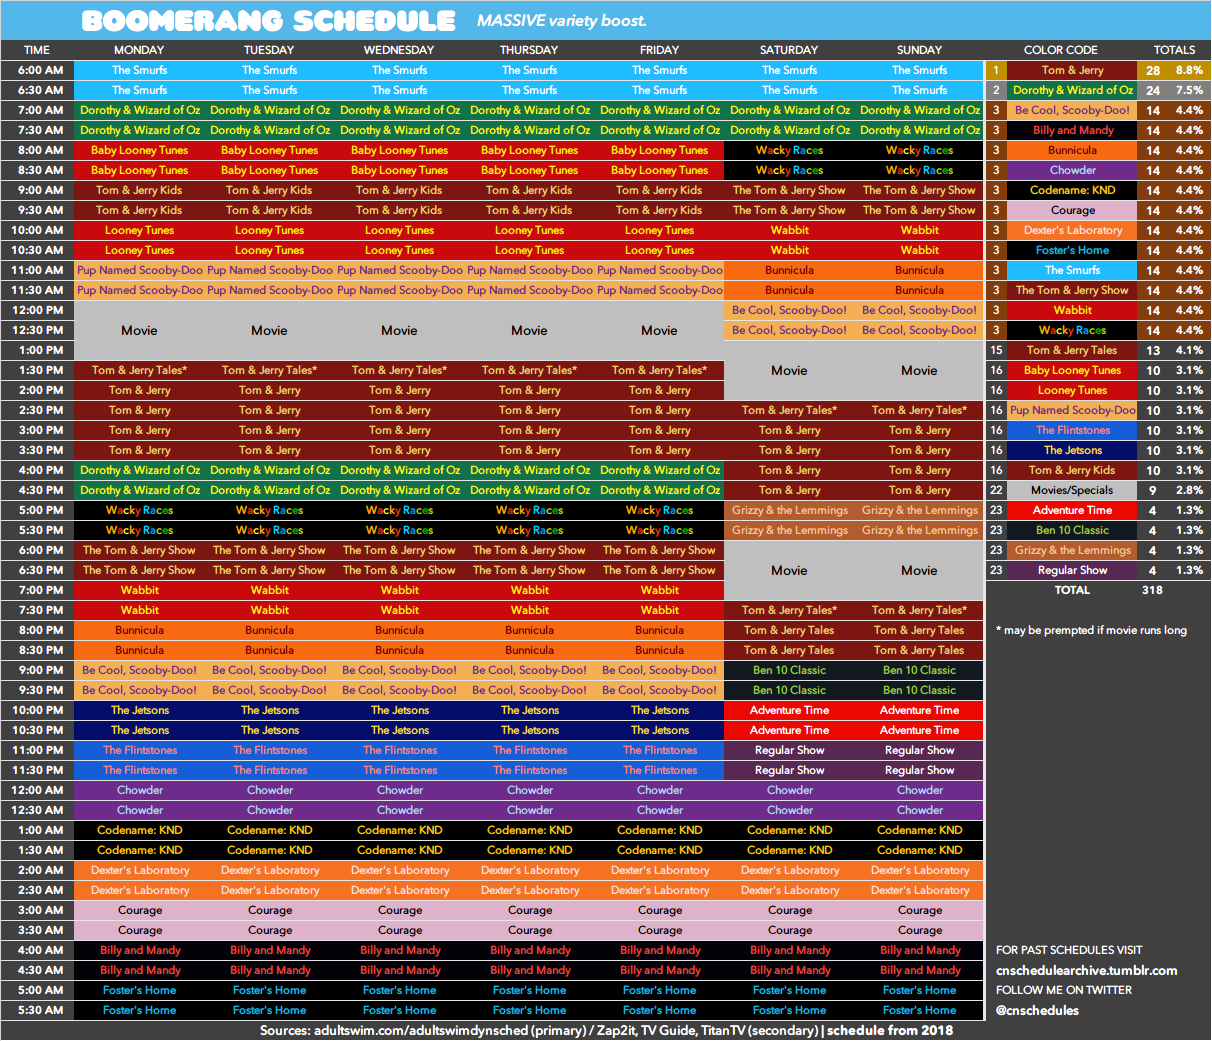 Cartoon Network schedule archive — Here's the Boomerang schedule as of  Monday, July...